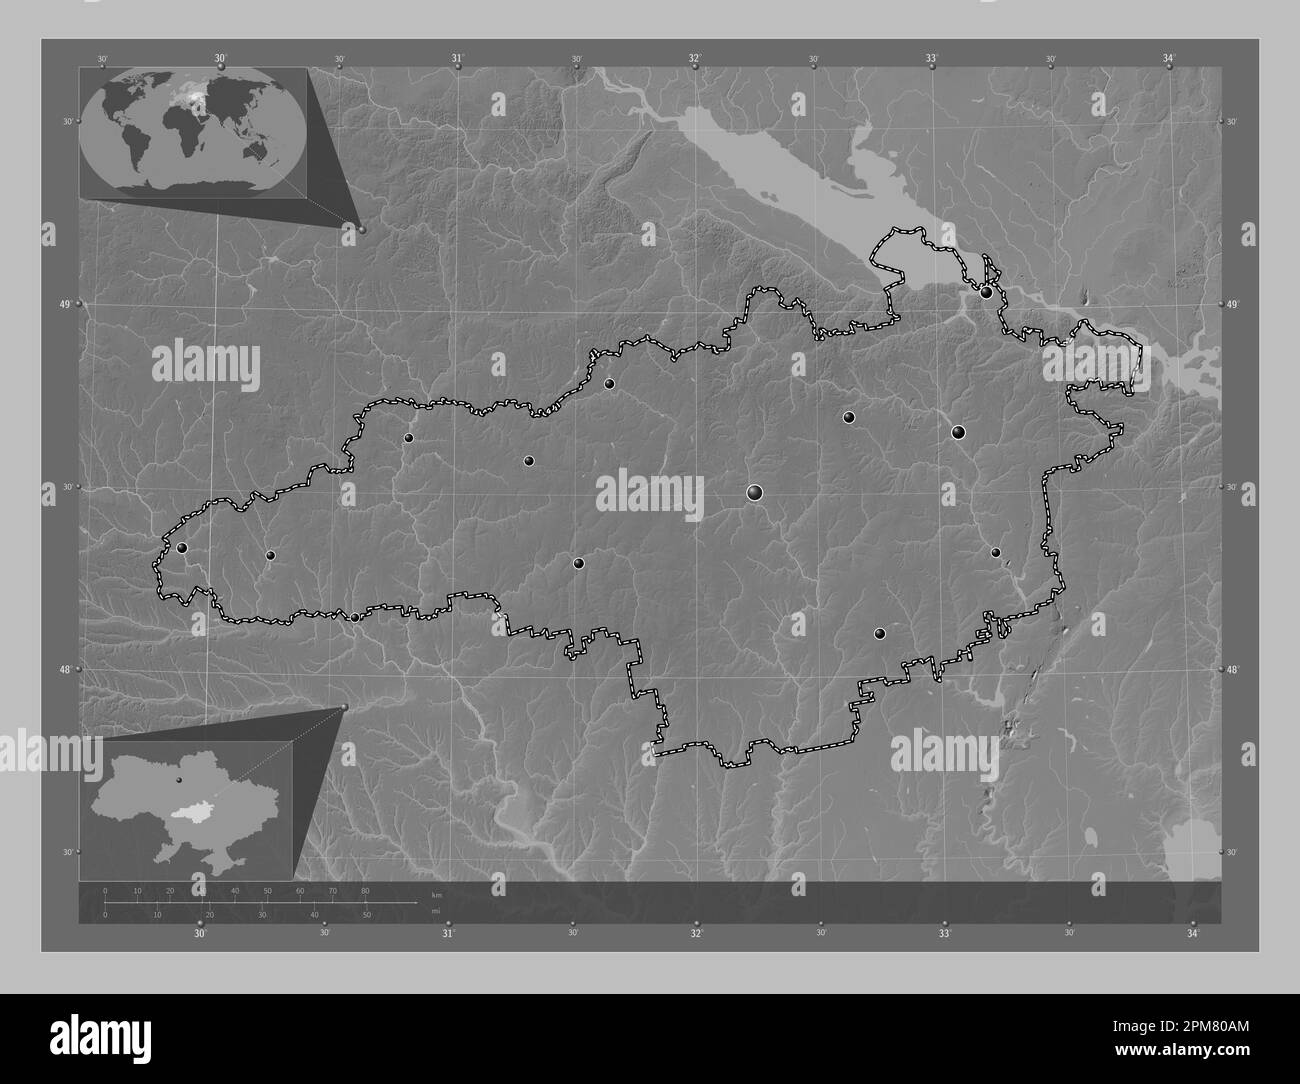 Kirovohrad, region of Ukraine. Grayscale elevation map with lakes and rivers. Locations of major cities of the region. Corner auxiliary location maps Stock Photo